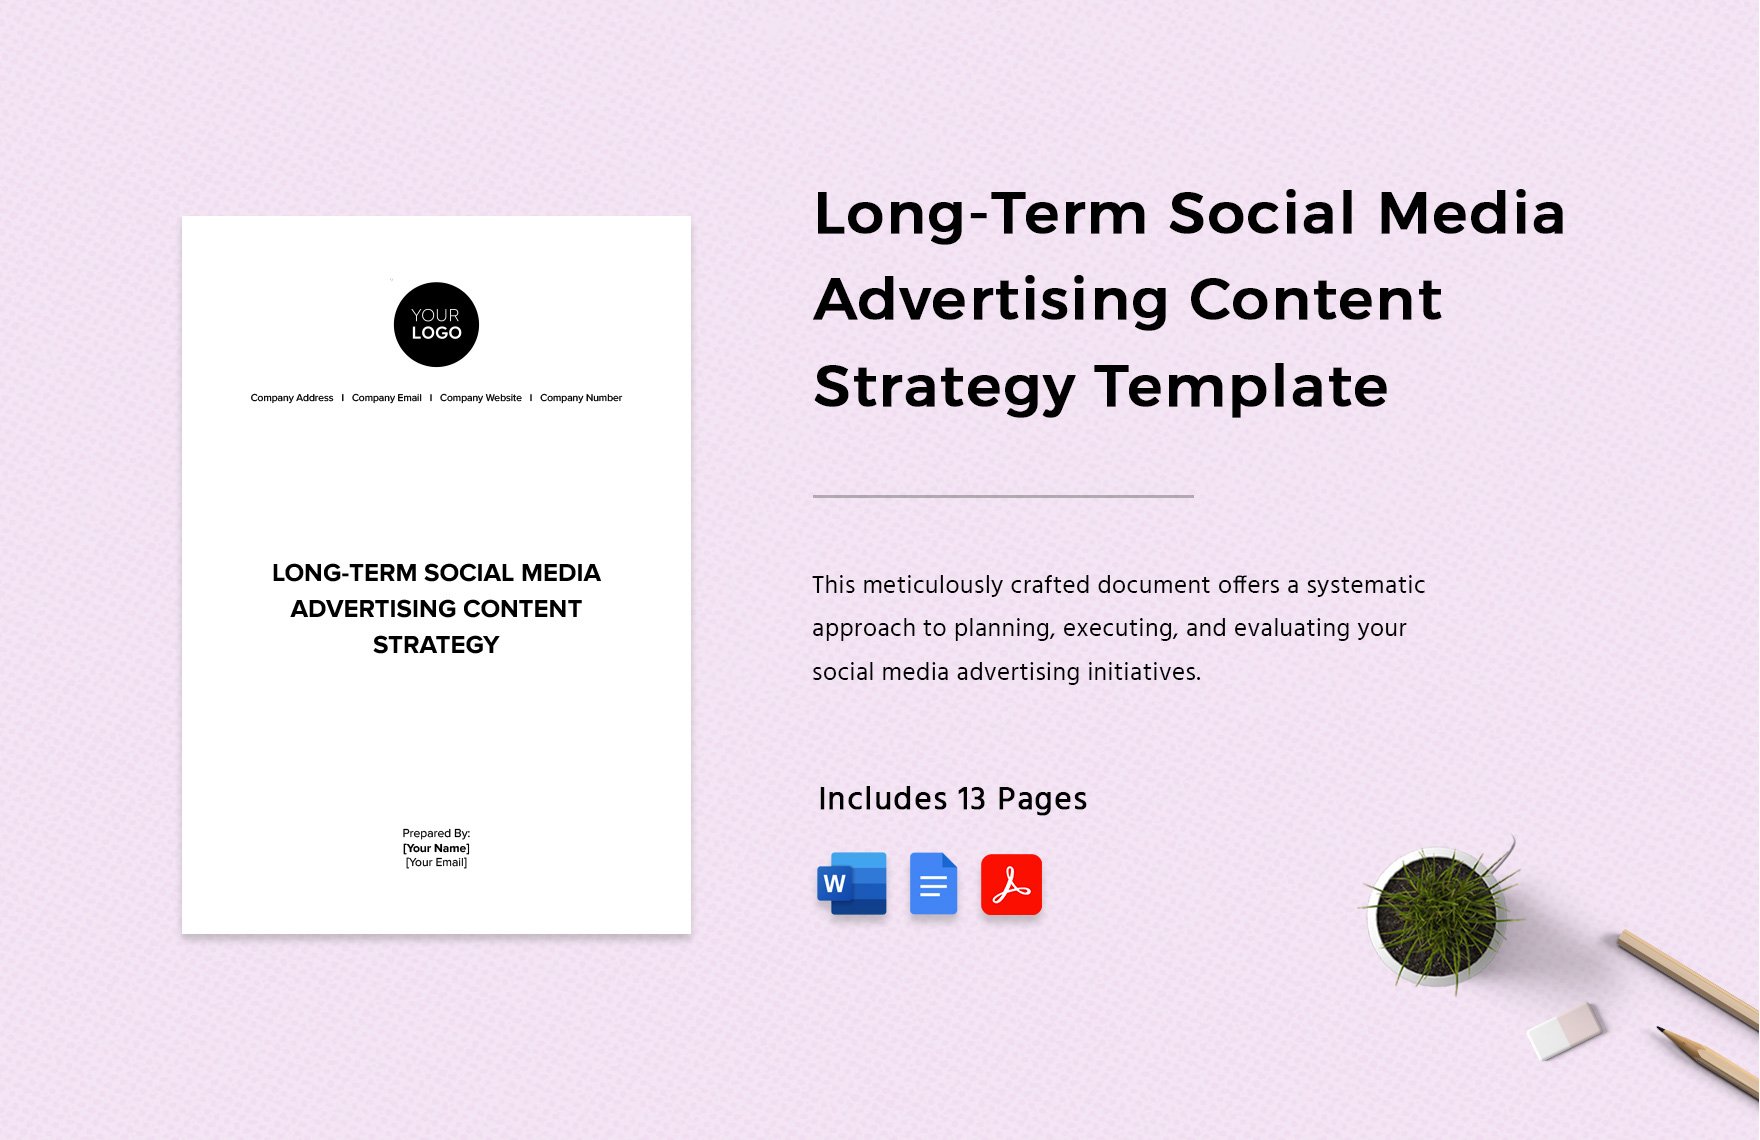 Long-Term Social Media Advertising Content Strategy Template